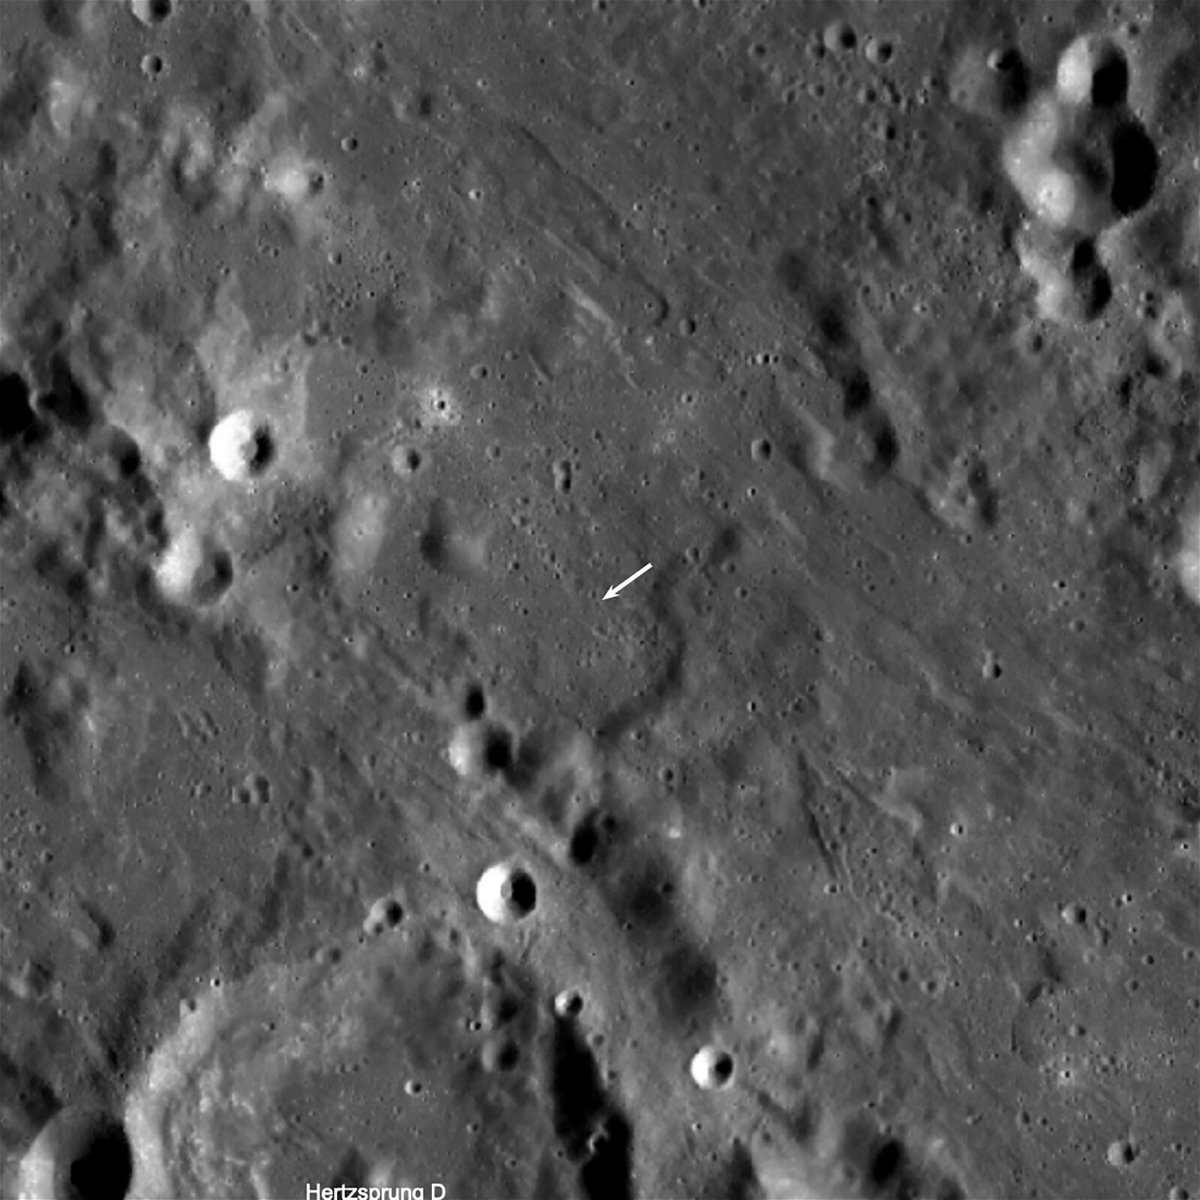 <i>NASA/Goddard/Arizona State University</i><br/>The new crater is smaller than others and not visible in this view